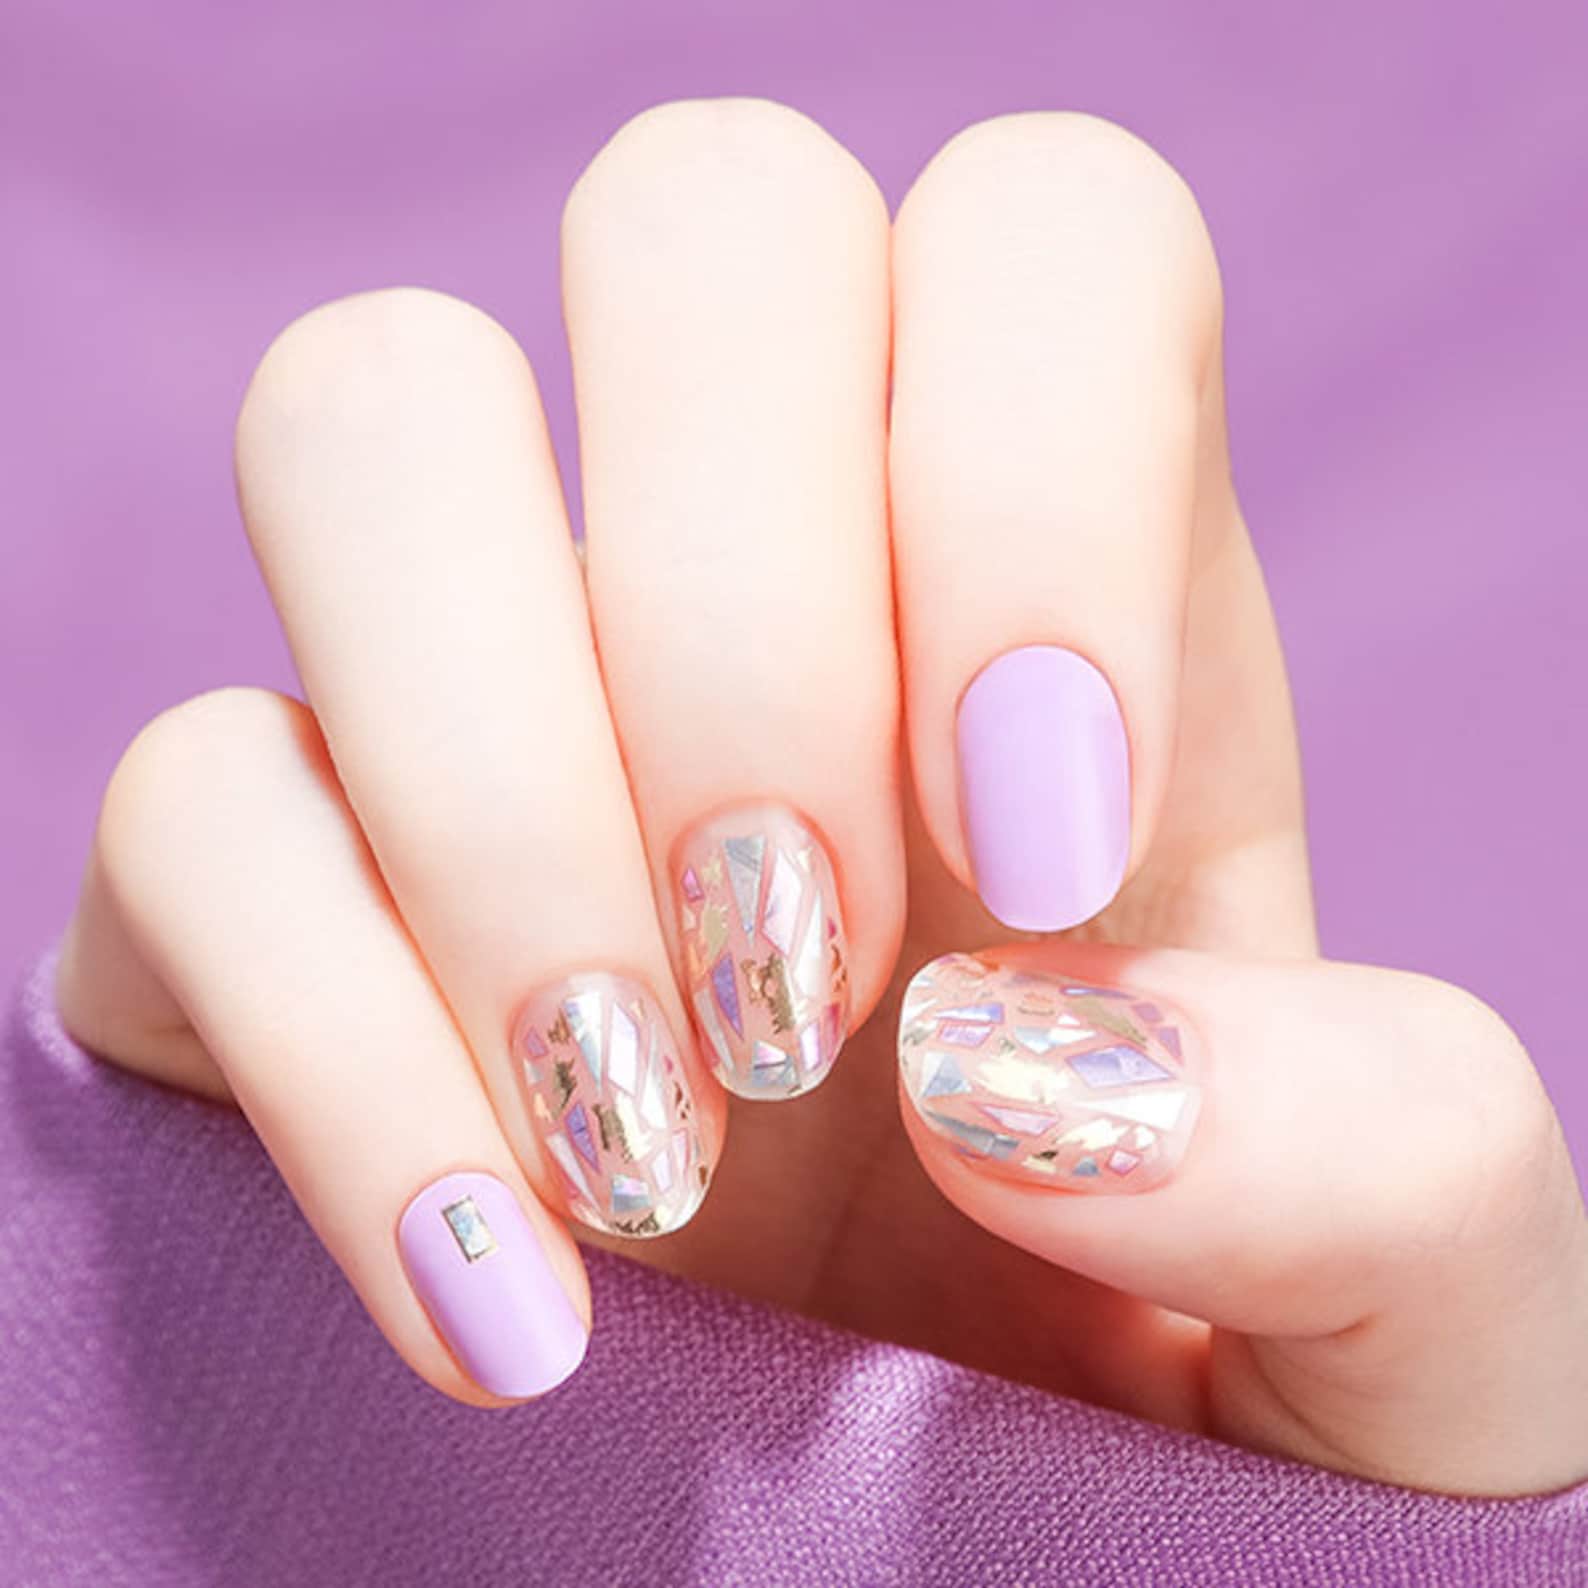 Lavender Mother-of Pearl Nail Art / 8S14 Let's Be Together - Etsy